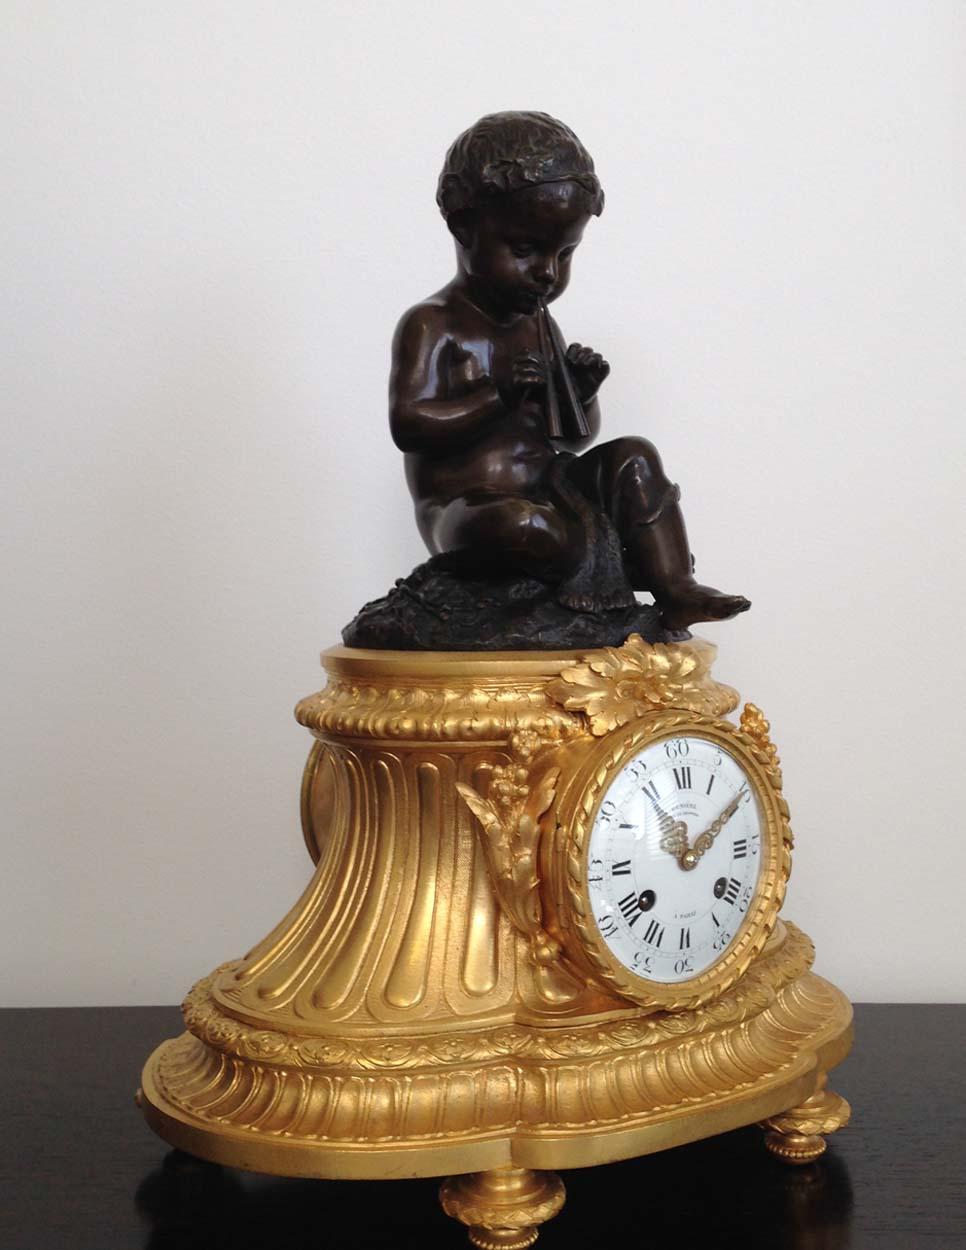 Patinated 19th Century French Ormolu and Bronze Mantel Clock by Deniere, Paris